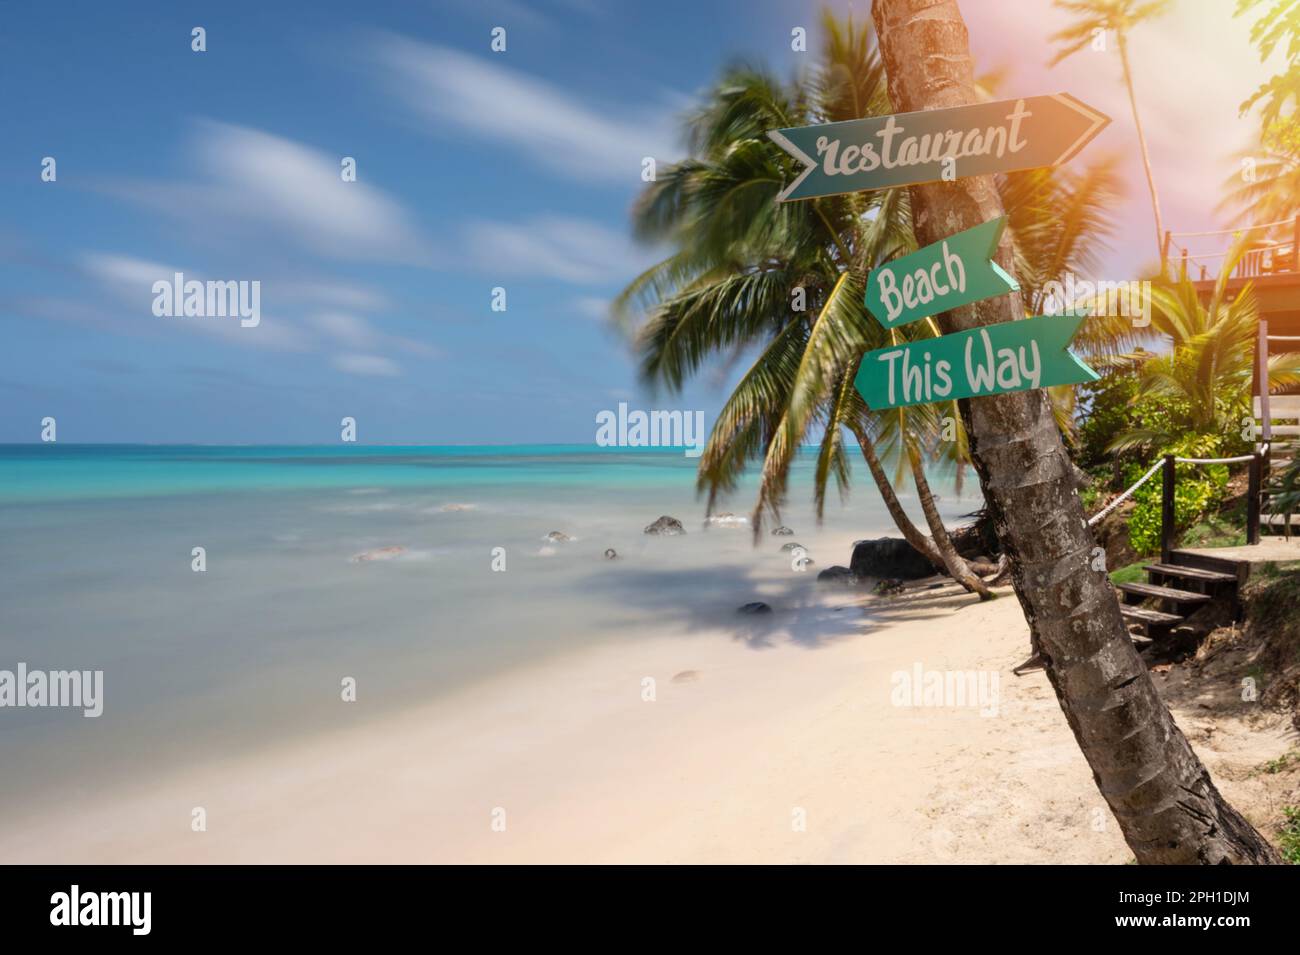 Beach wooden arrow sign on palm tree in Caribbean sea background Stock Photo